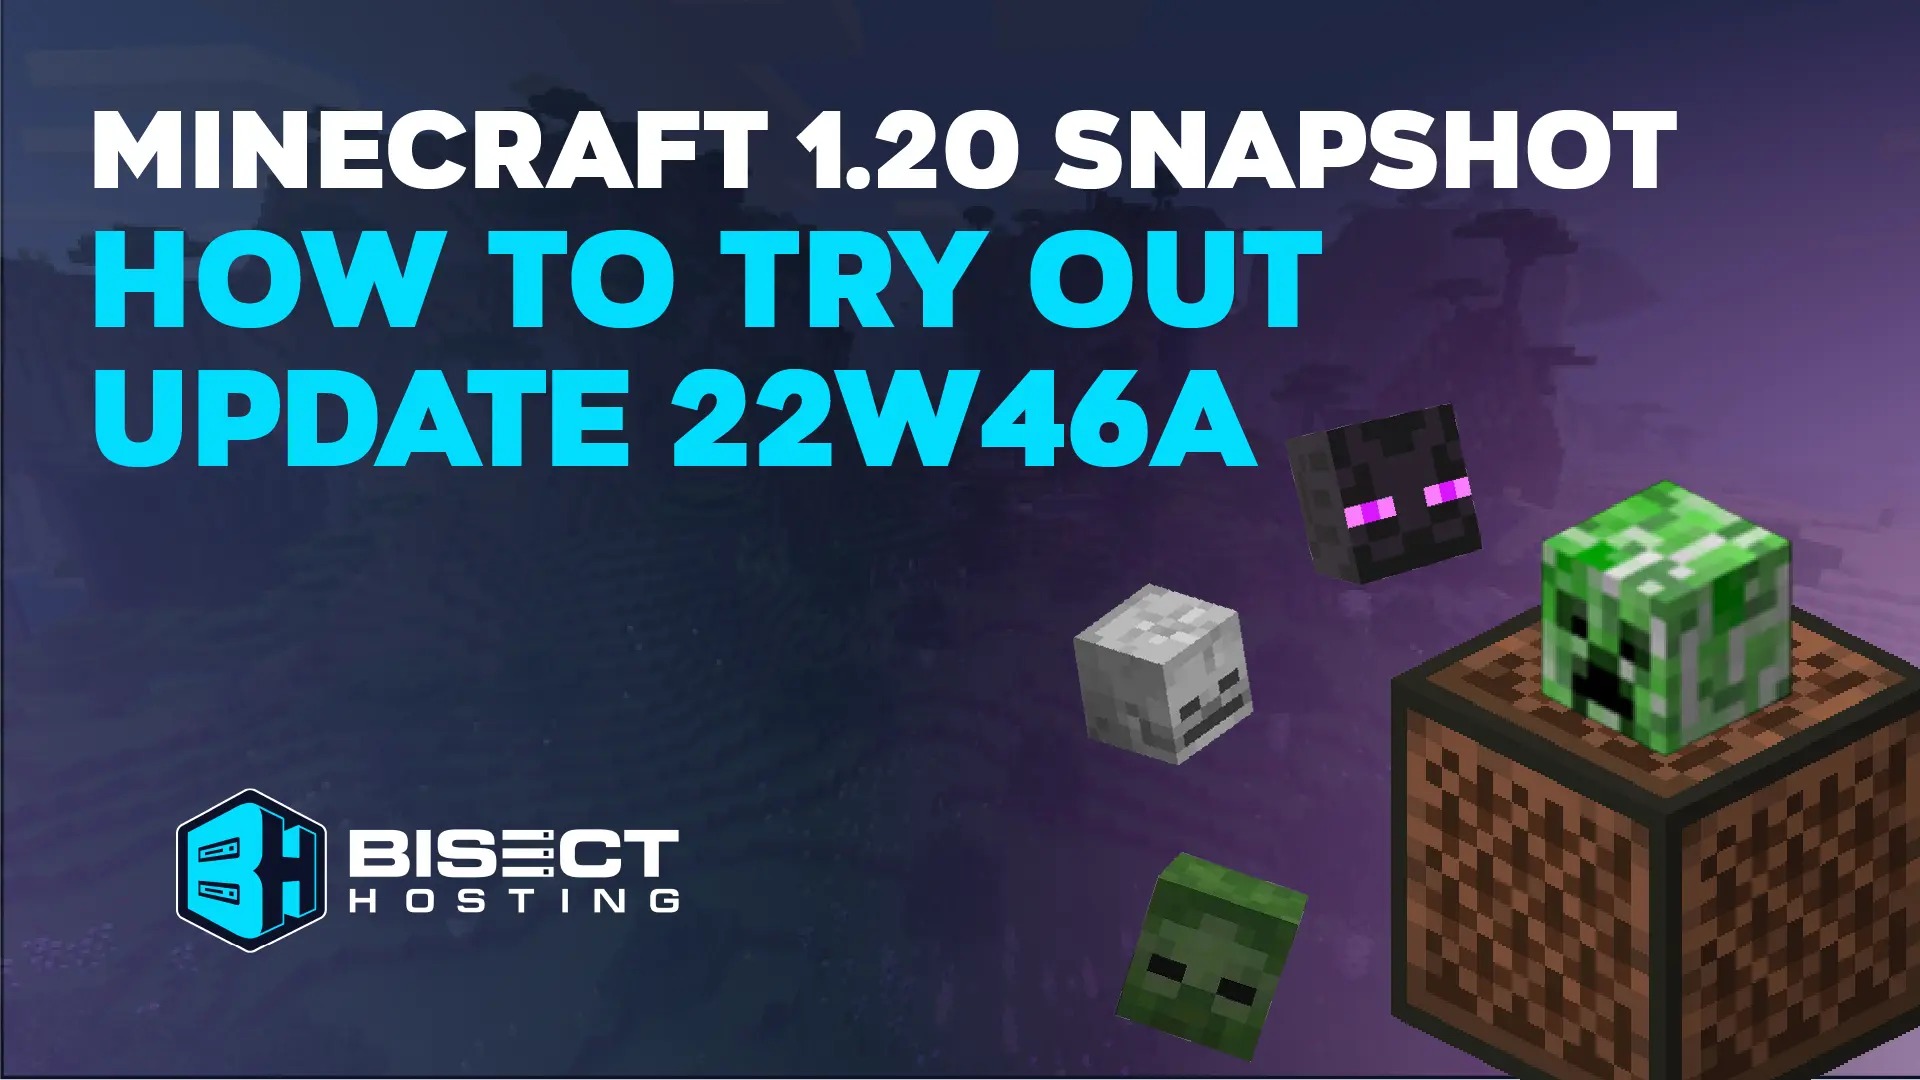 Minecraft 1.20 Snapshot: How to Try Out Update 22W46A